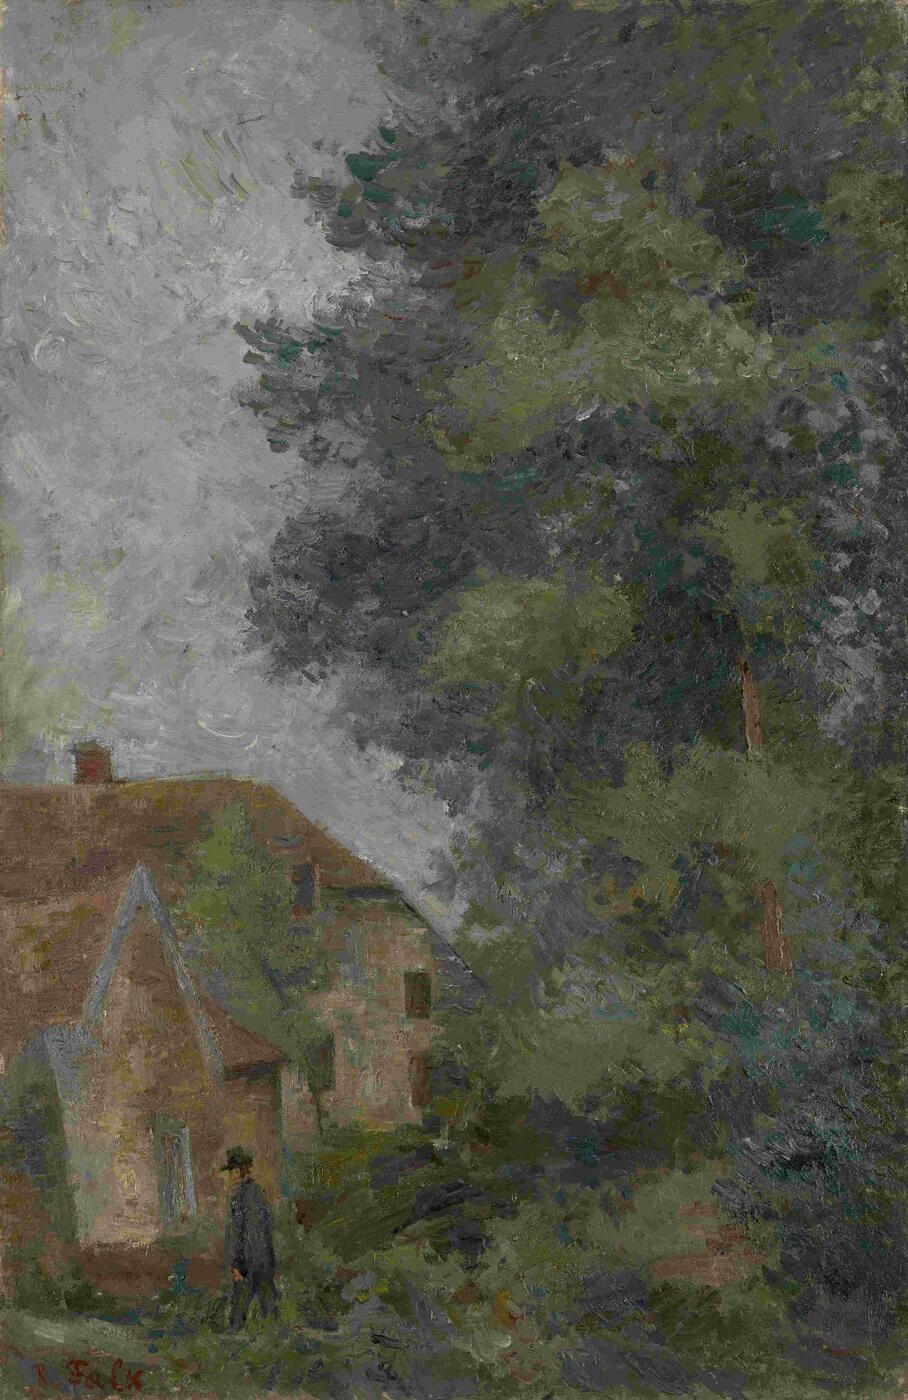 Village Landscape with Tall Trees